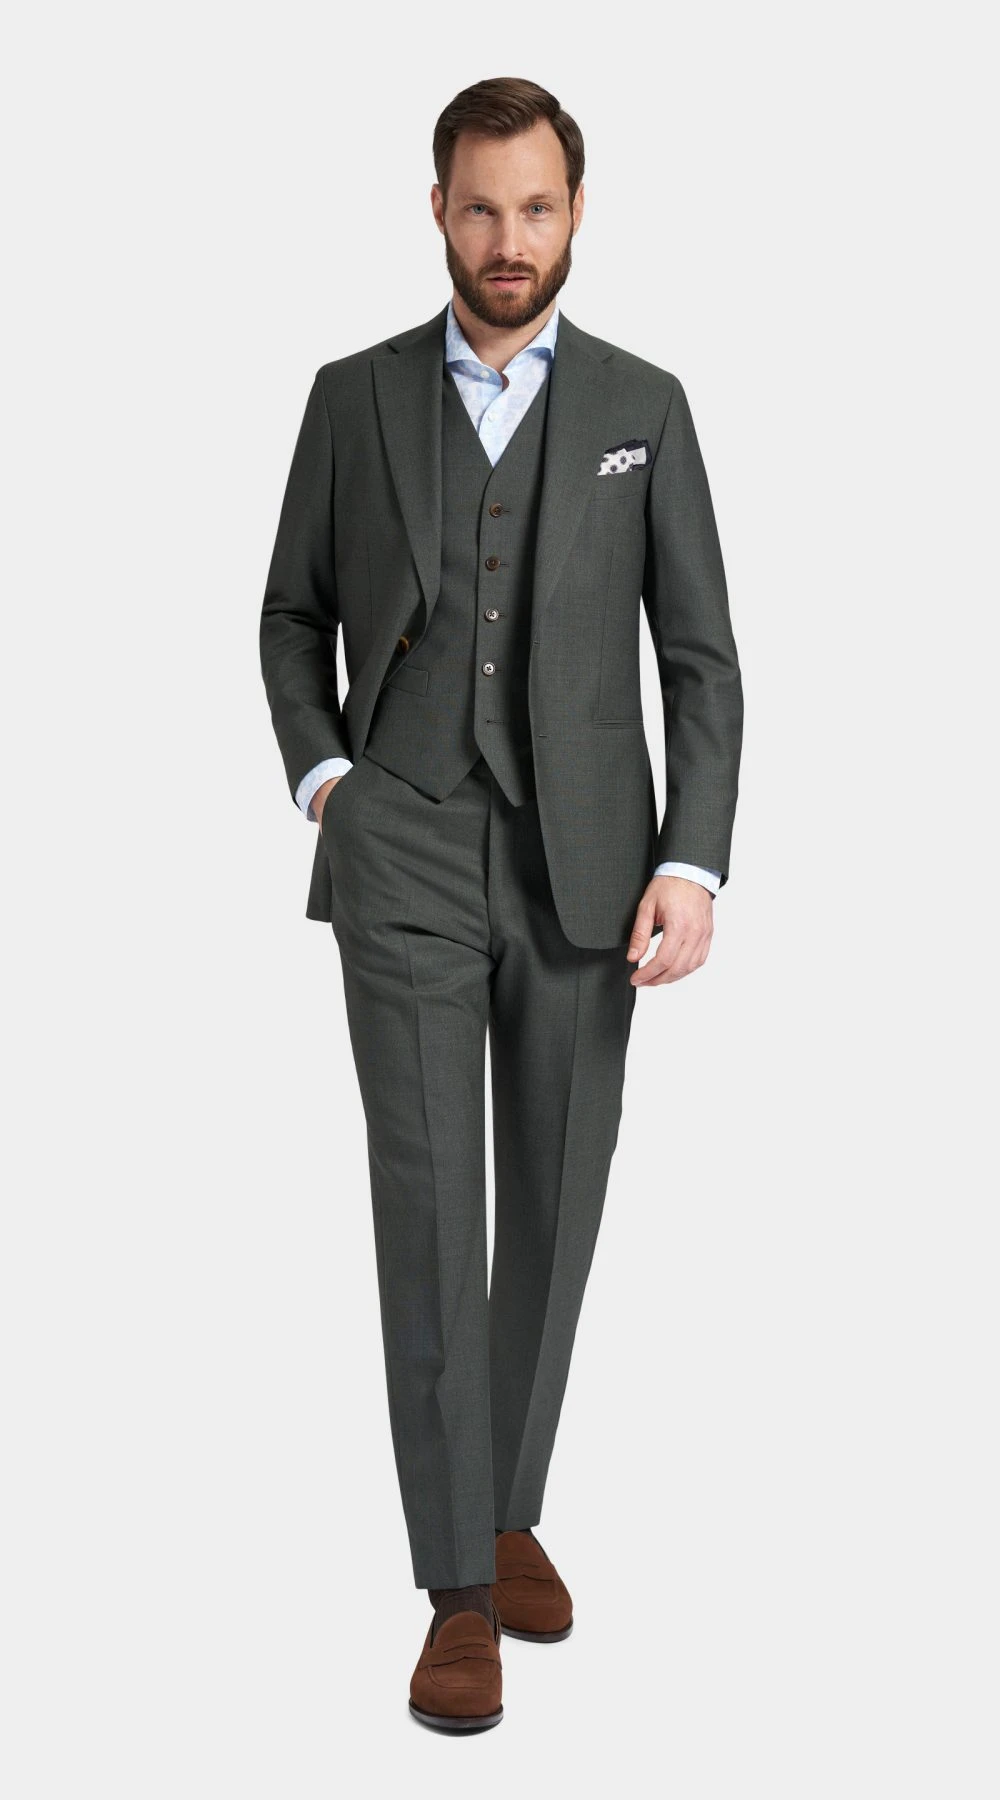 Green grey three piece wedding suit suit, with a white paisley pocket square and brown suede leather loafers